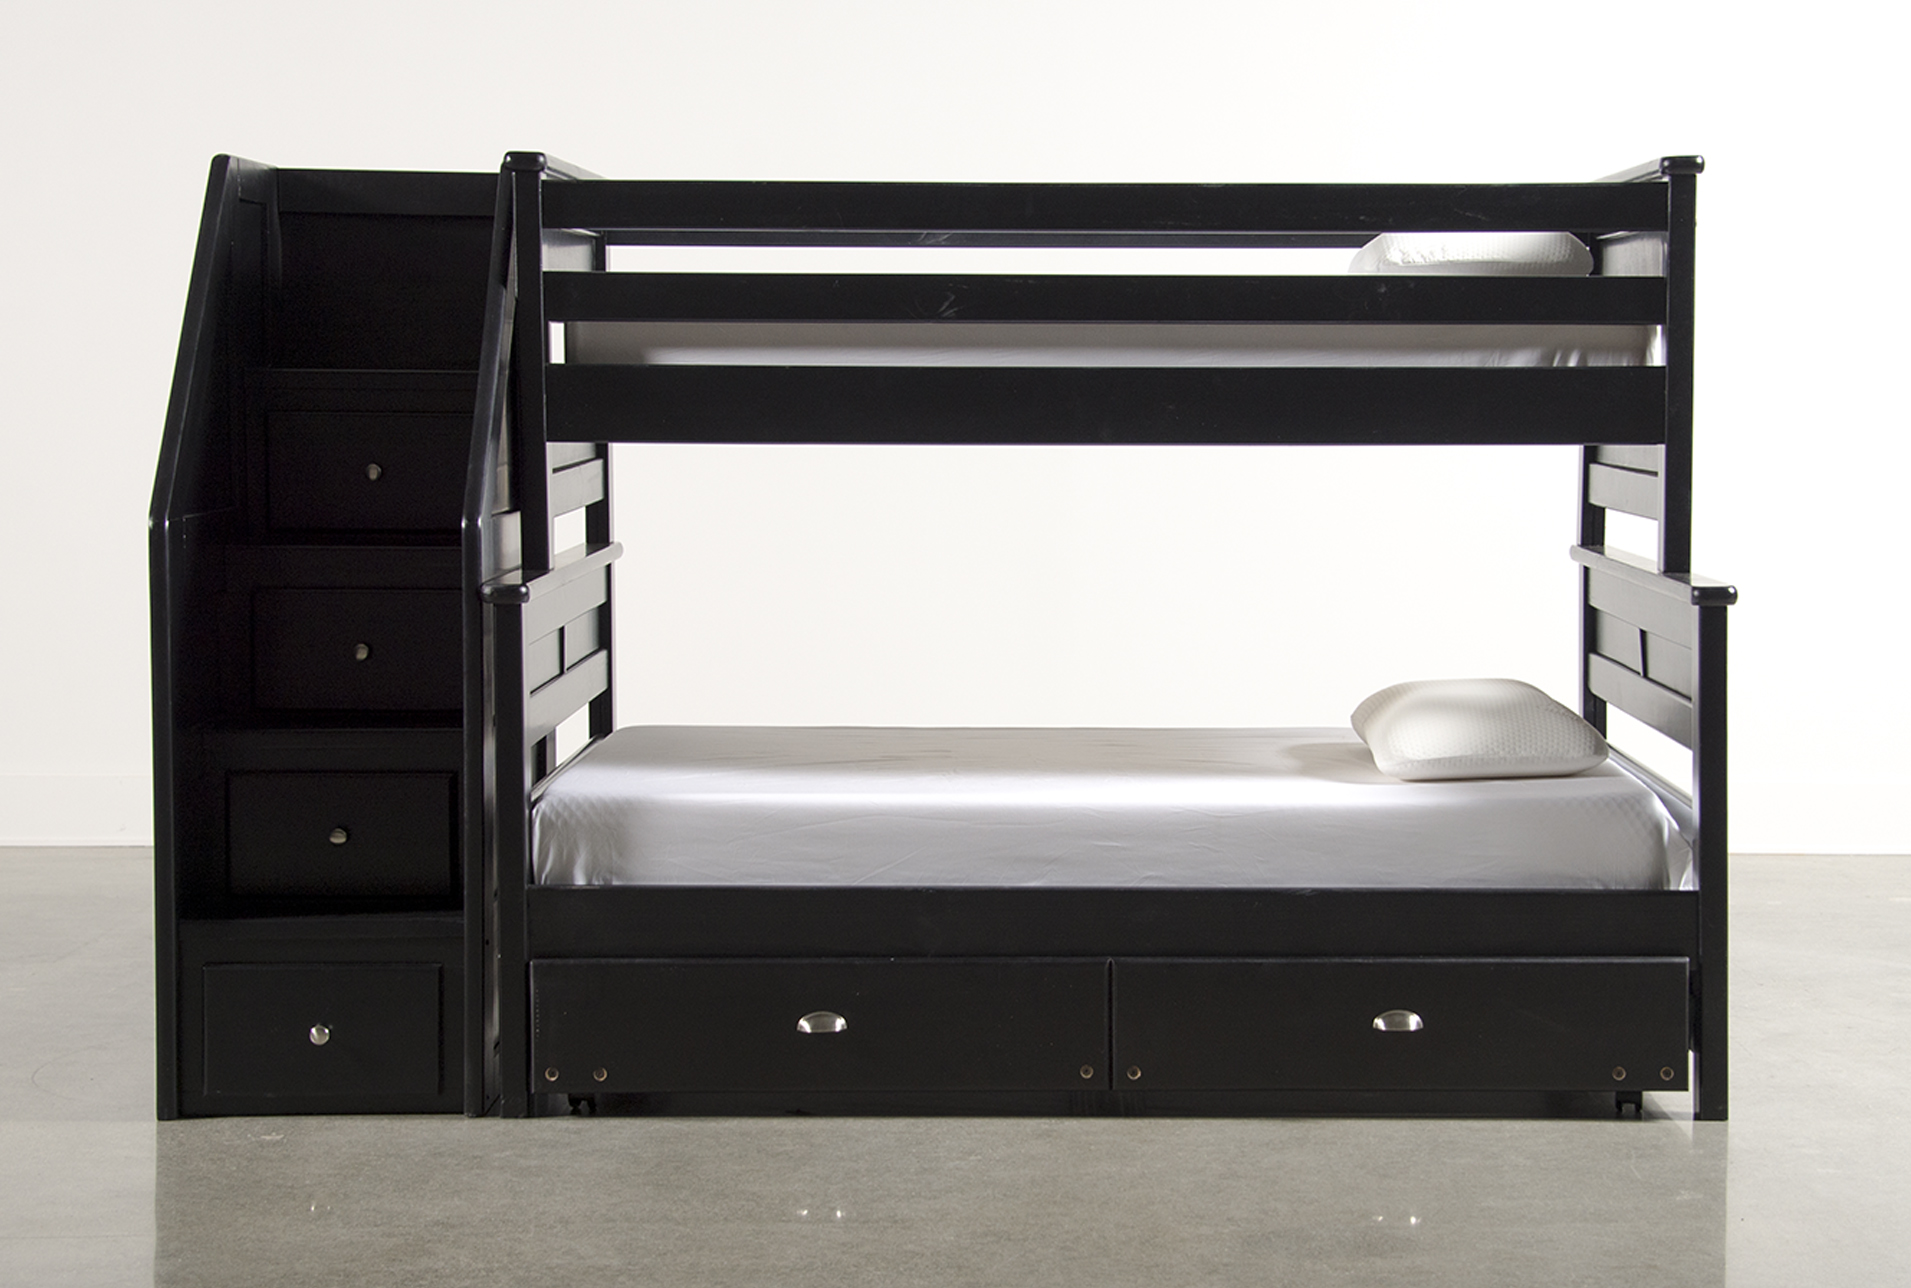 cheap bunk beds with drawers